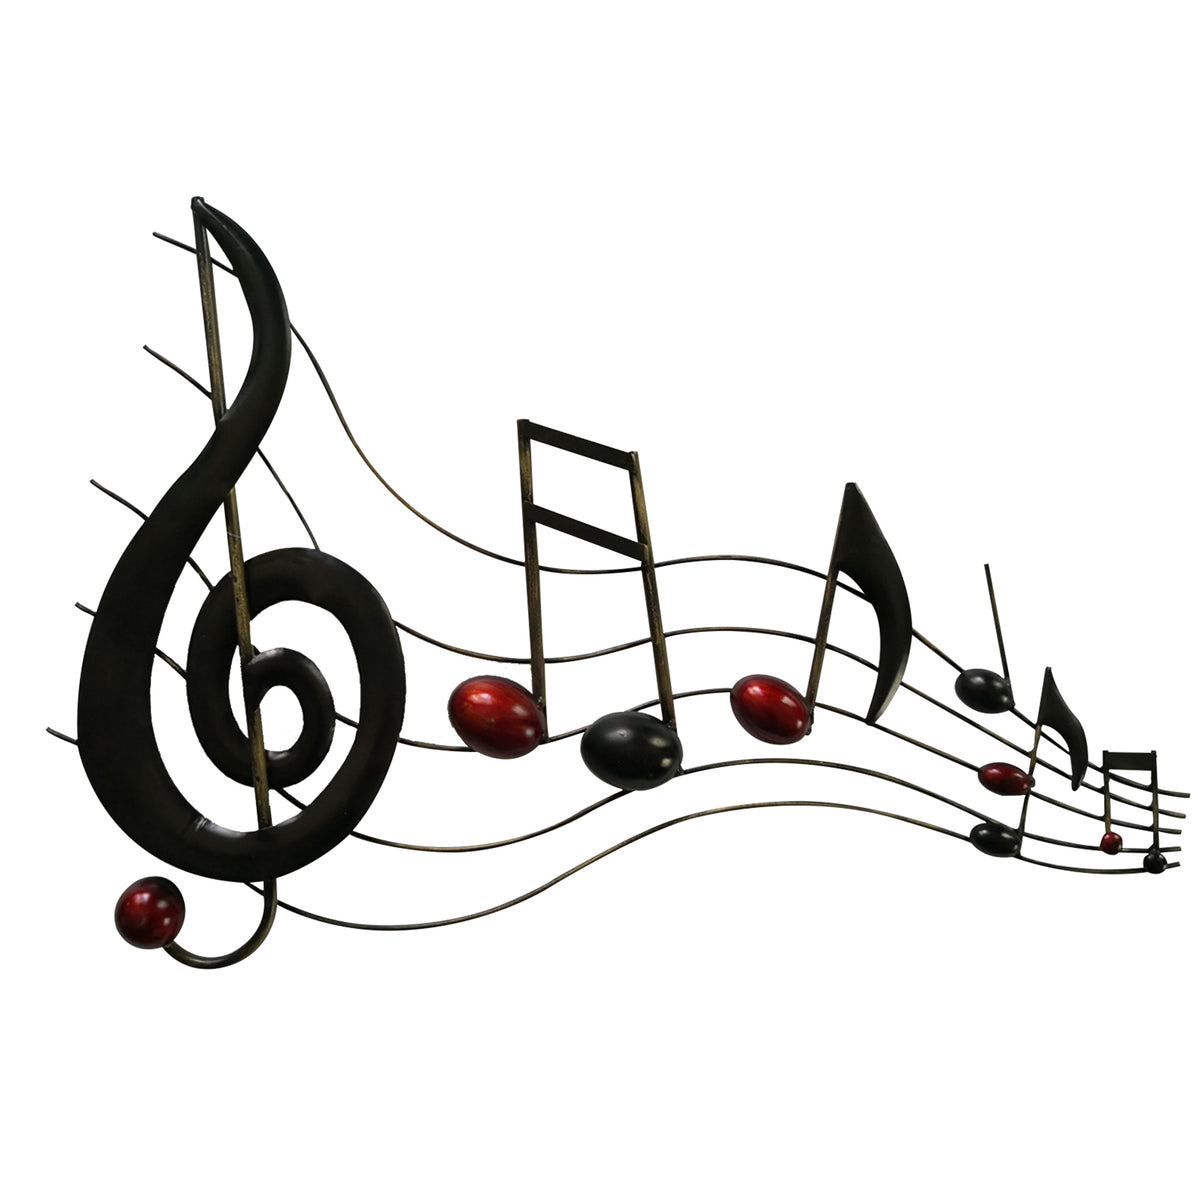 Metal Musical Notes Wall Hanging Art Decor, Black and Copper - BM05414